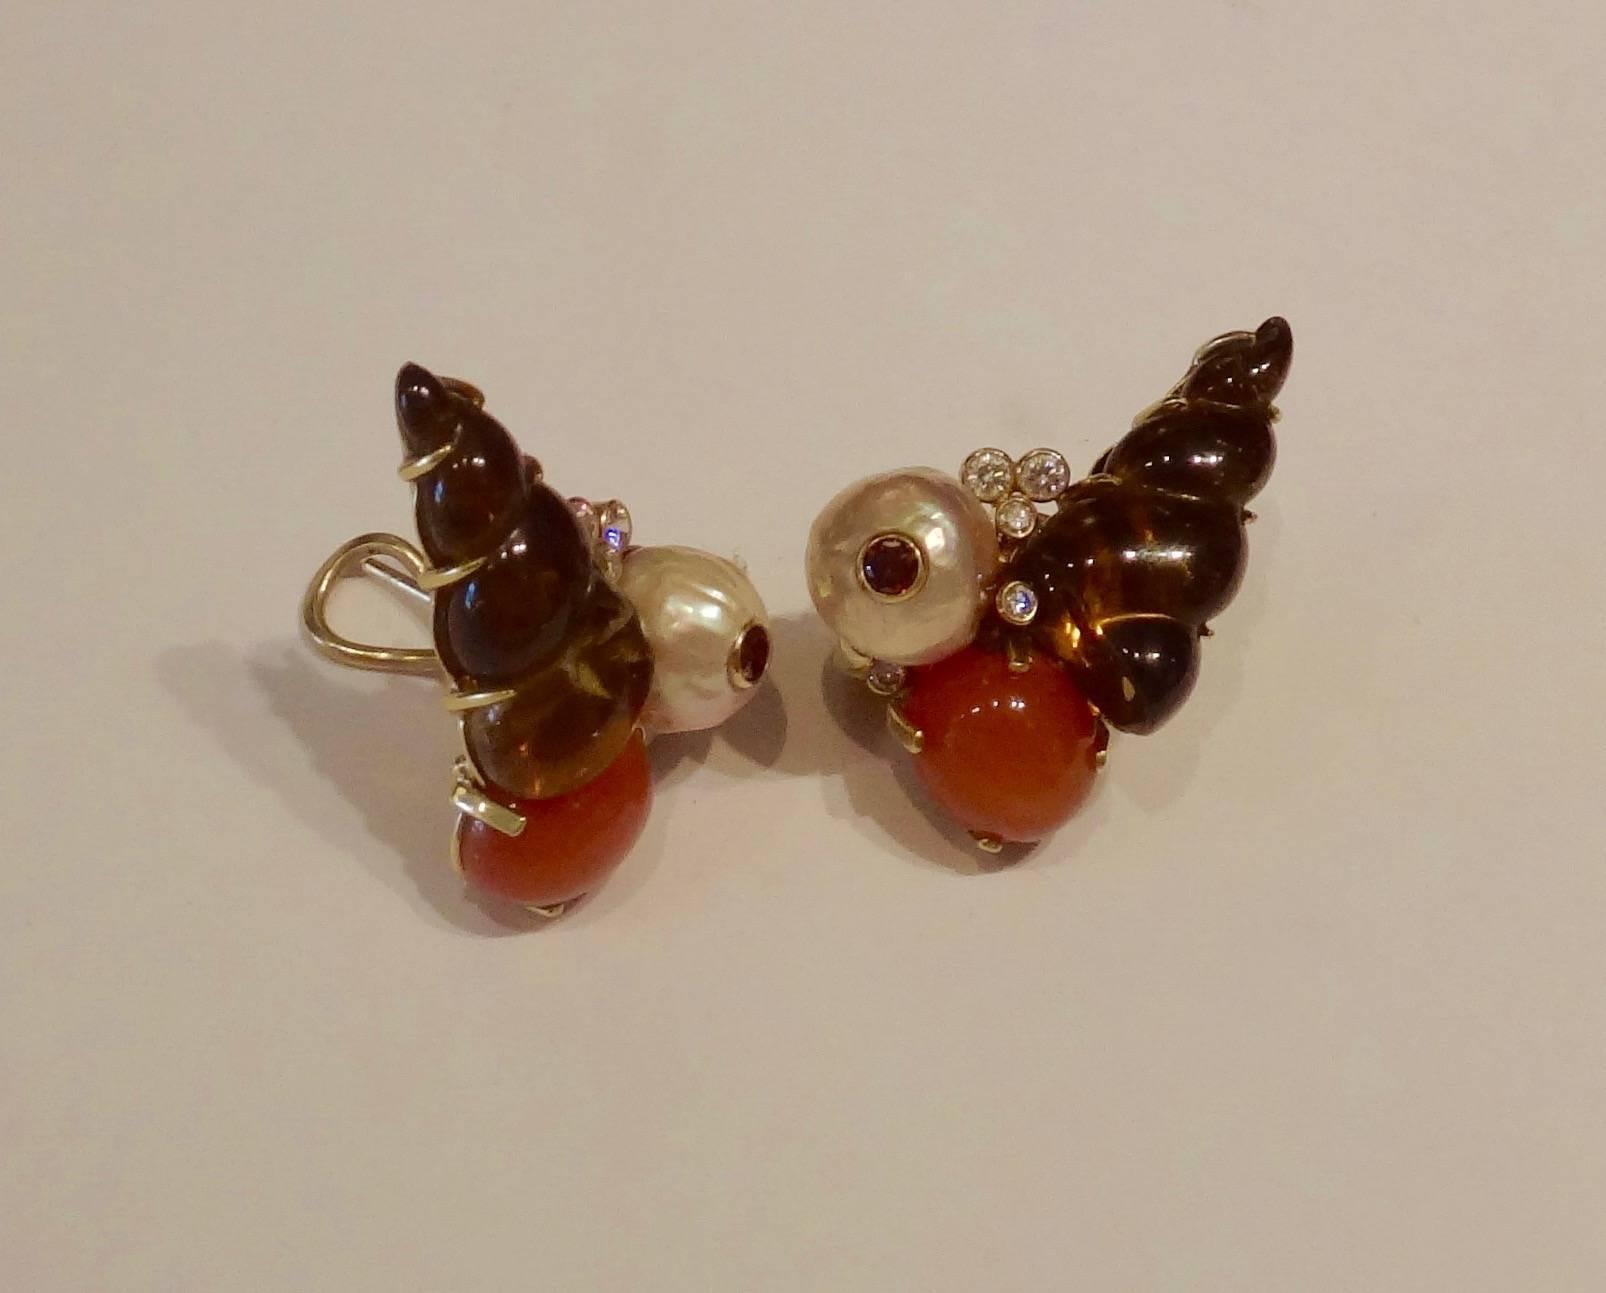 Carved citrines are combined with peach colored moonstones and Kasumi pearls along with cognac colored and white diamonds in these "Sealife" earrings.  Post with omega clip backs.  